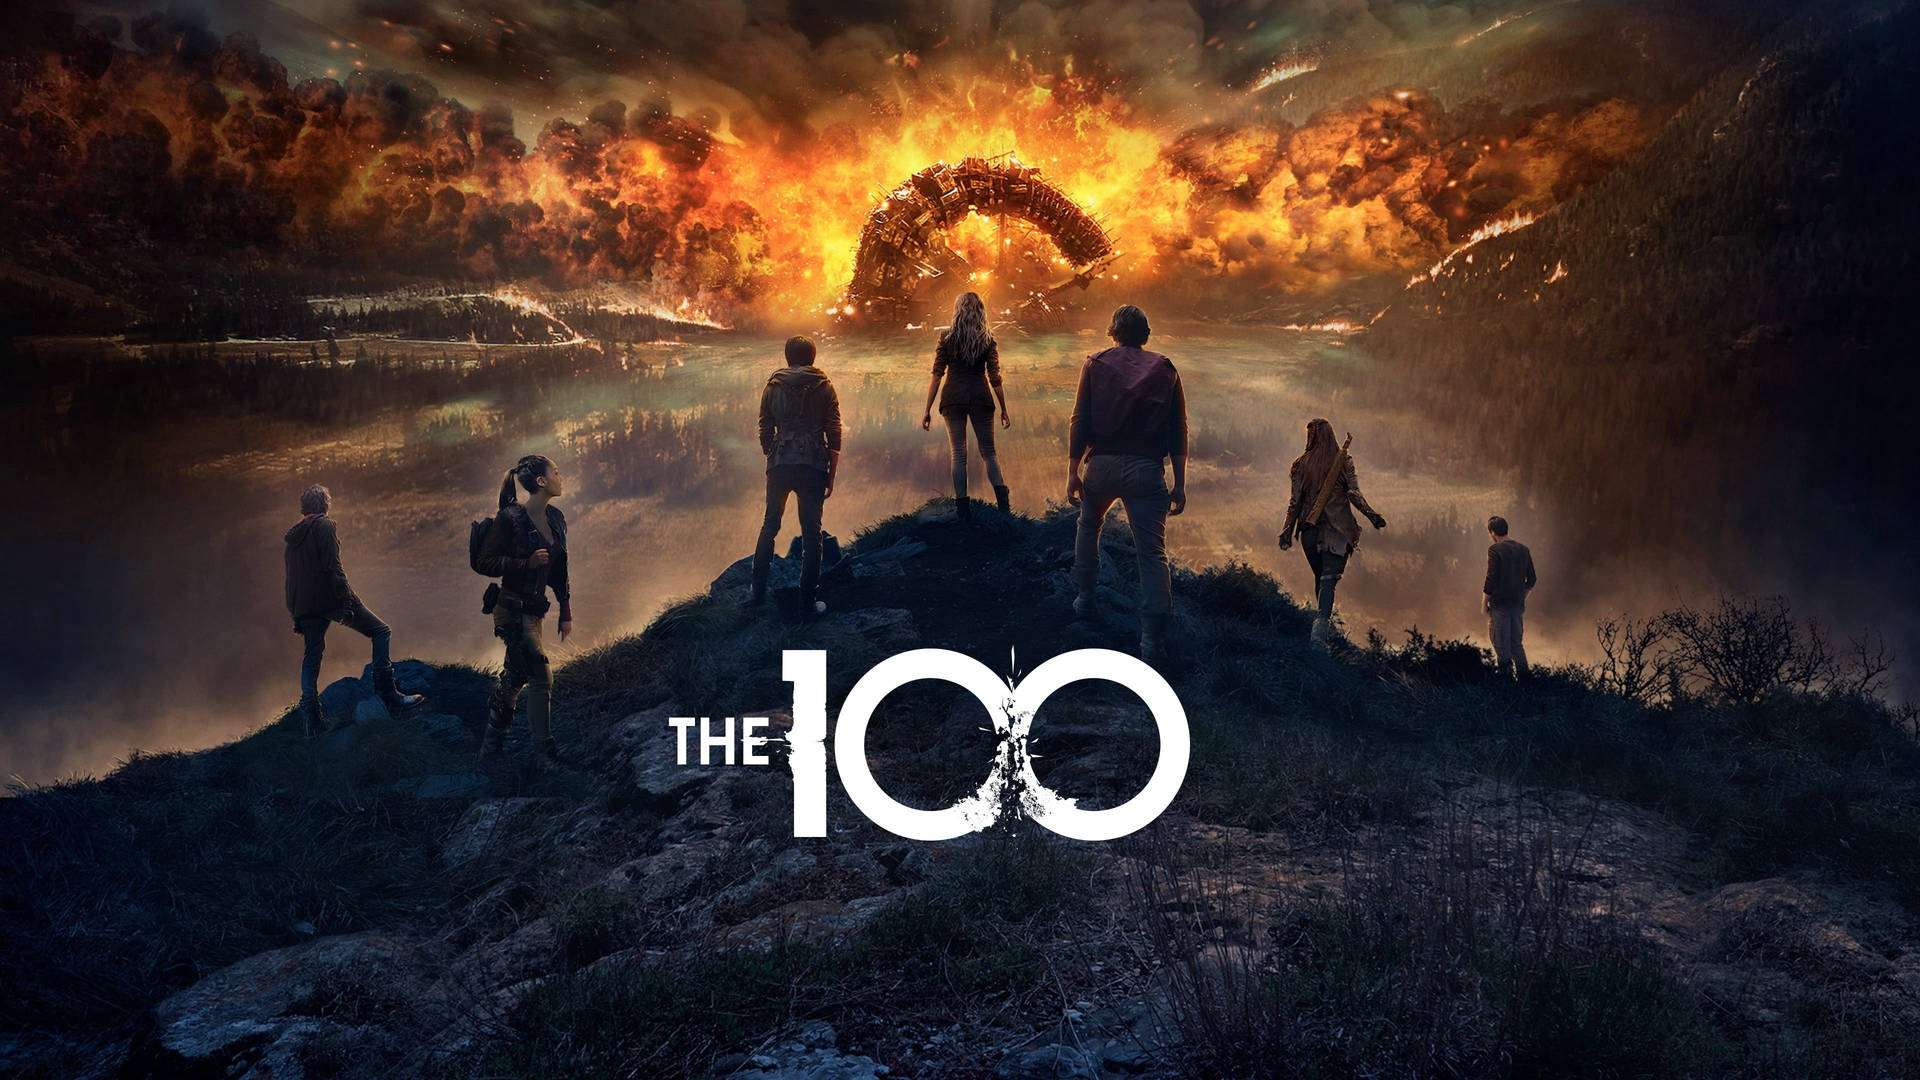 The 100 Science Fiction Television Series Wallpaper